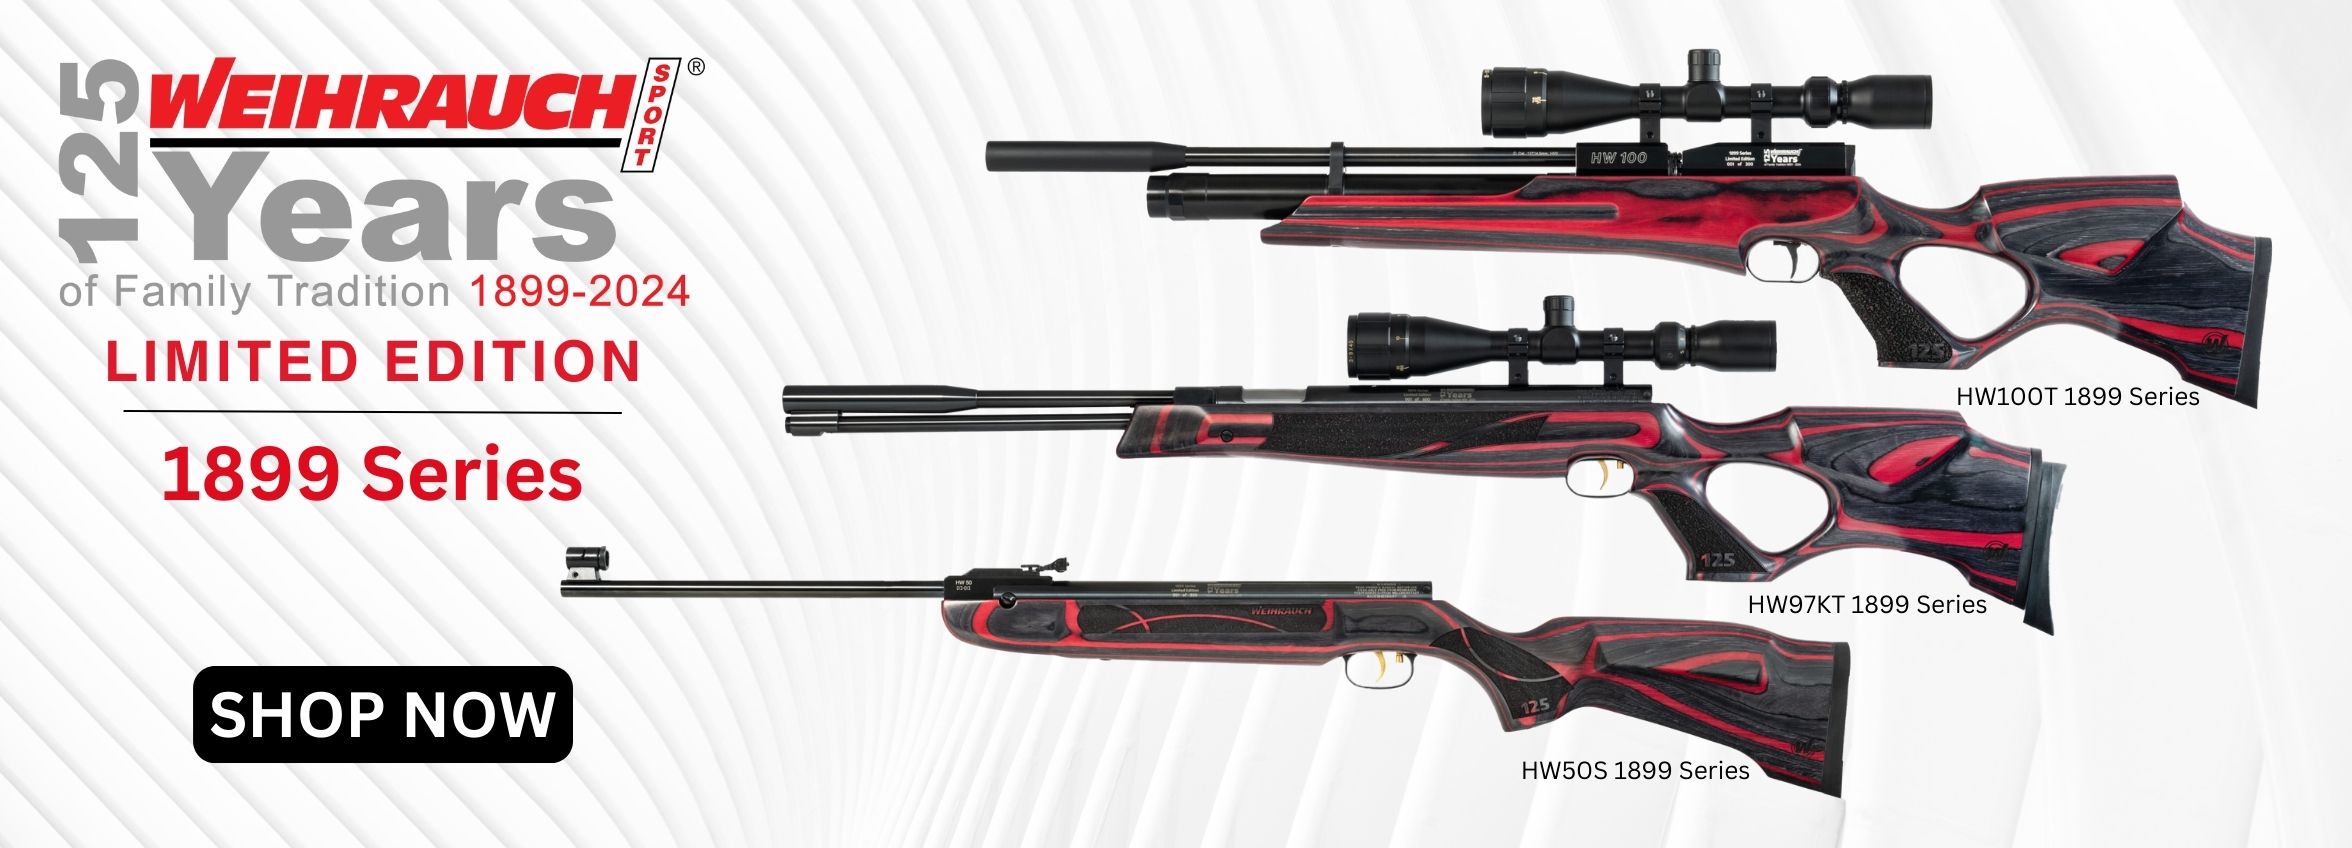 Buy the Limited Edition 125 Year 1899 Series Weihrauch Air Rifles